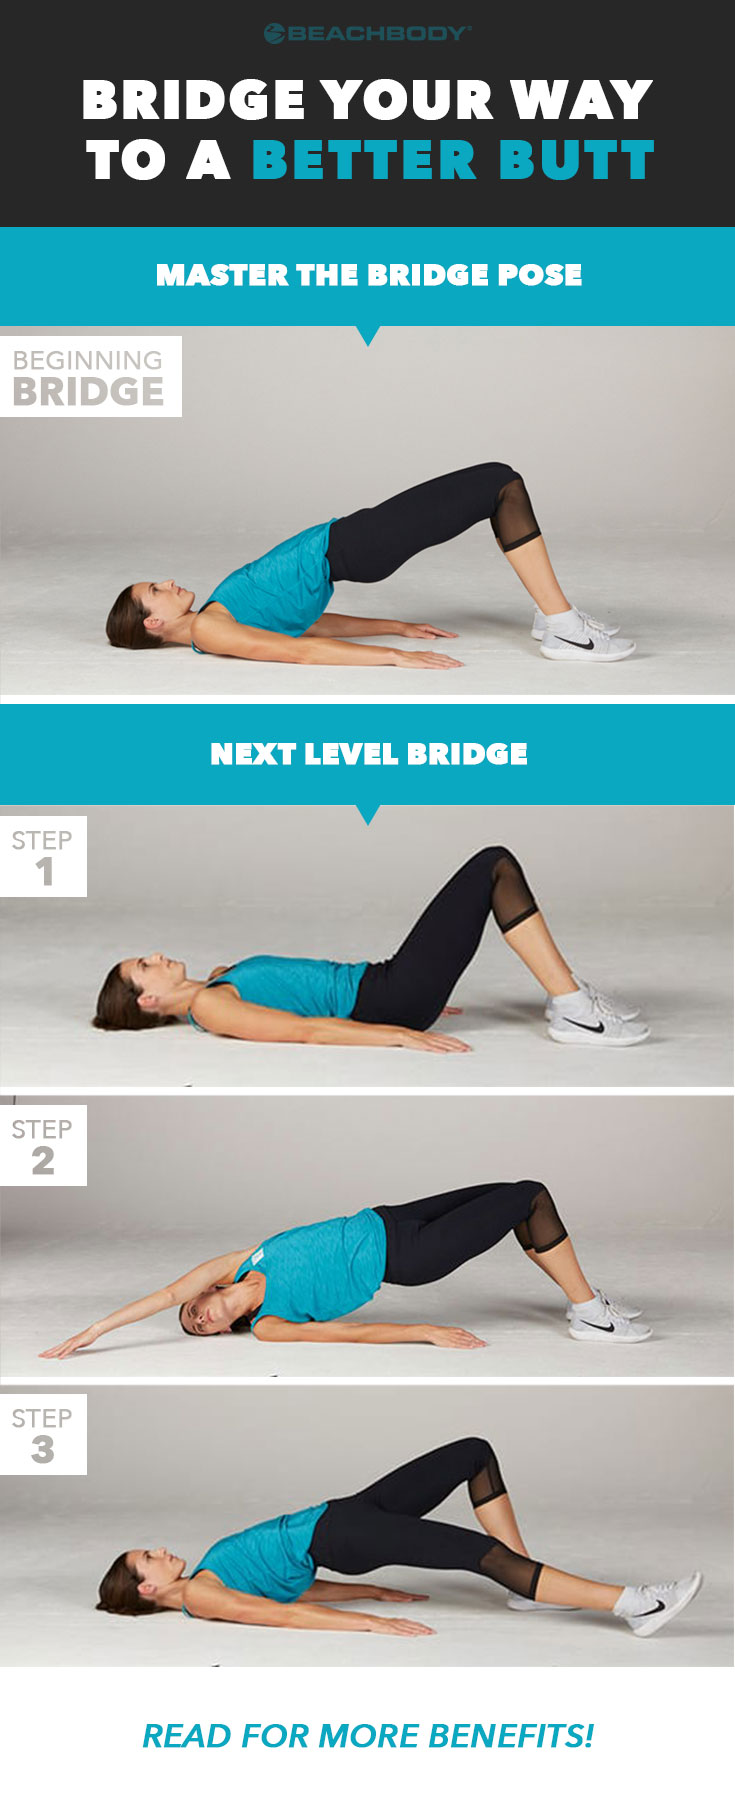 Never heard of a bridge exercise? Already a master? Read on to learn the basics, plus discover more challenging bridge exercise variations and their benefits.